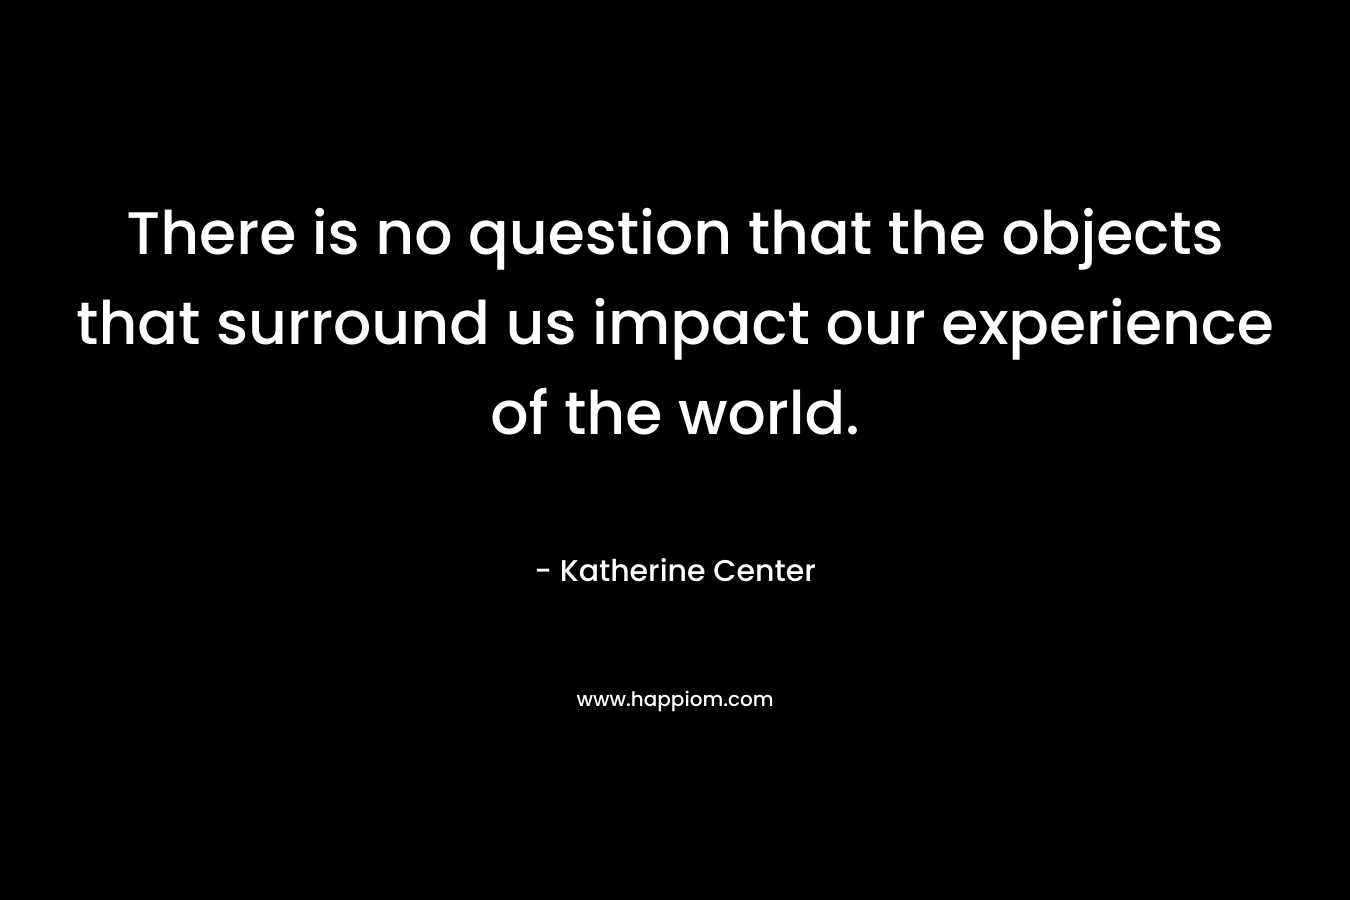 There is no question that the objects that surround us impact our experience of the world.